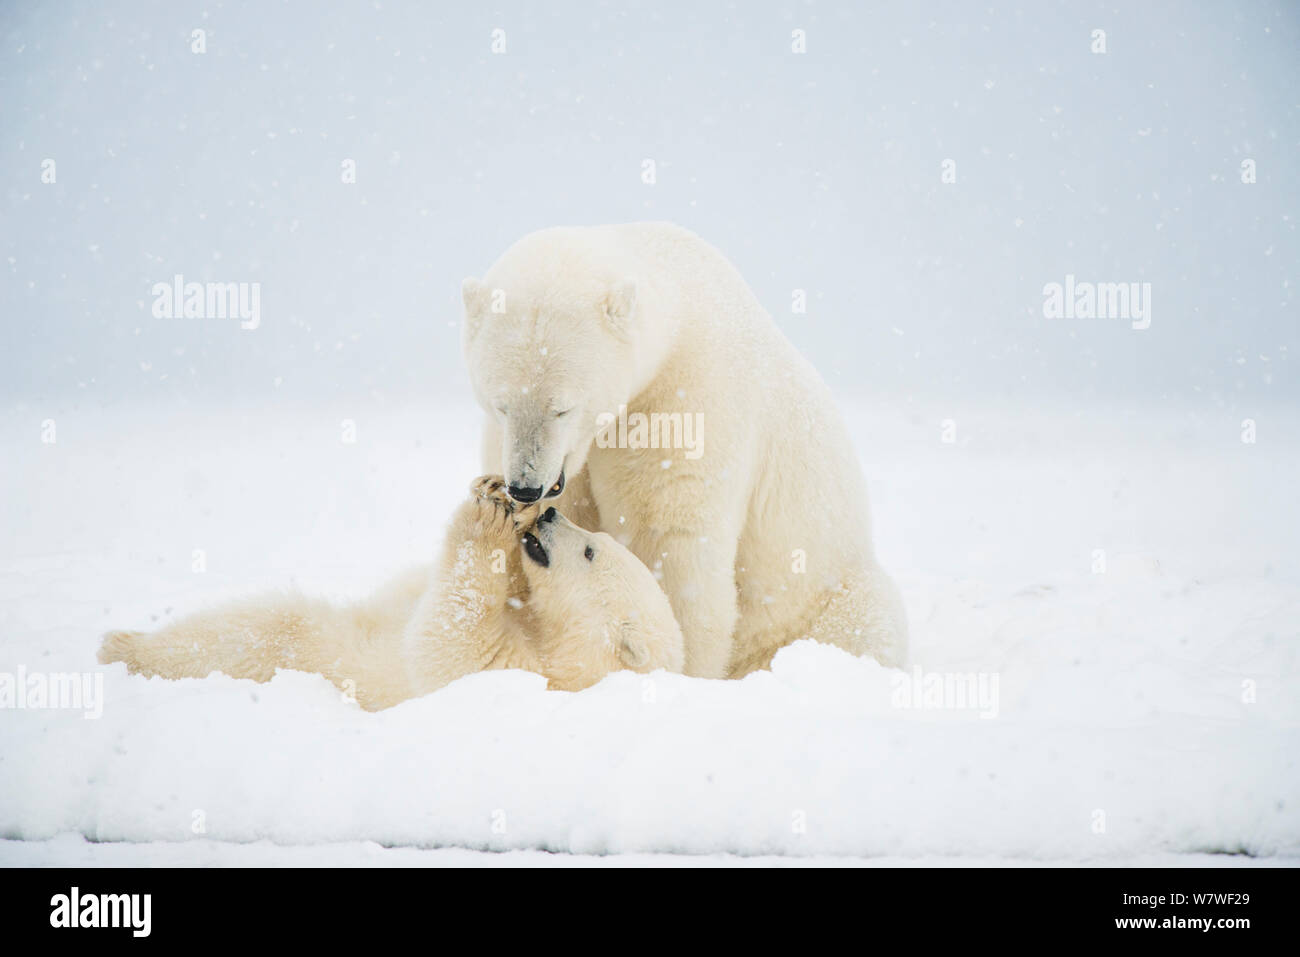 Polar bear (Ursus maritimus) sow with spring cub playing with one another on a barrier island during autumn freeze up, Bernard Spit, North Slope, Arctic coast of Alaska, September Stock Photo